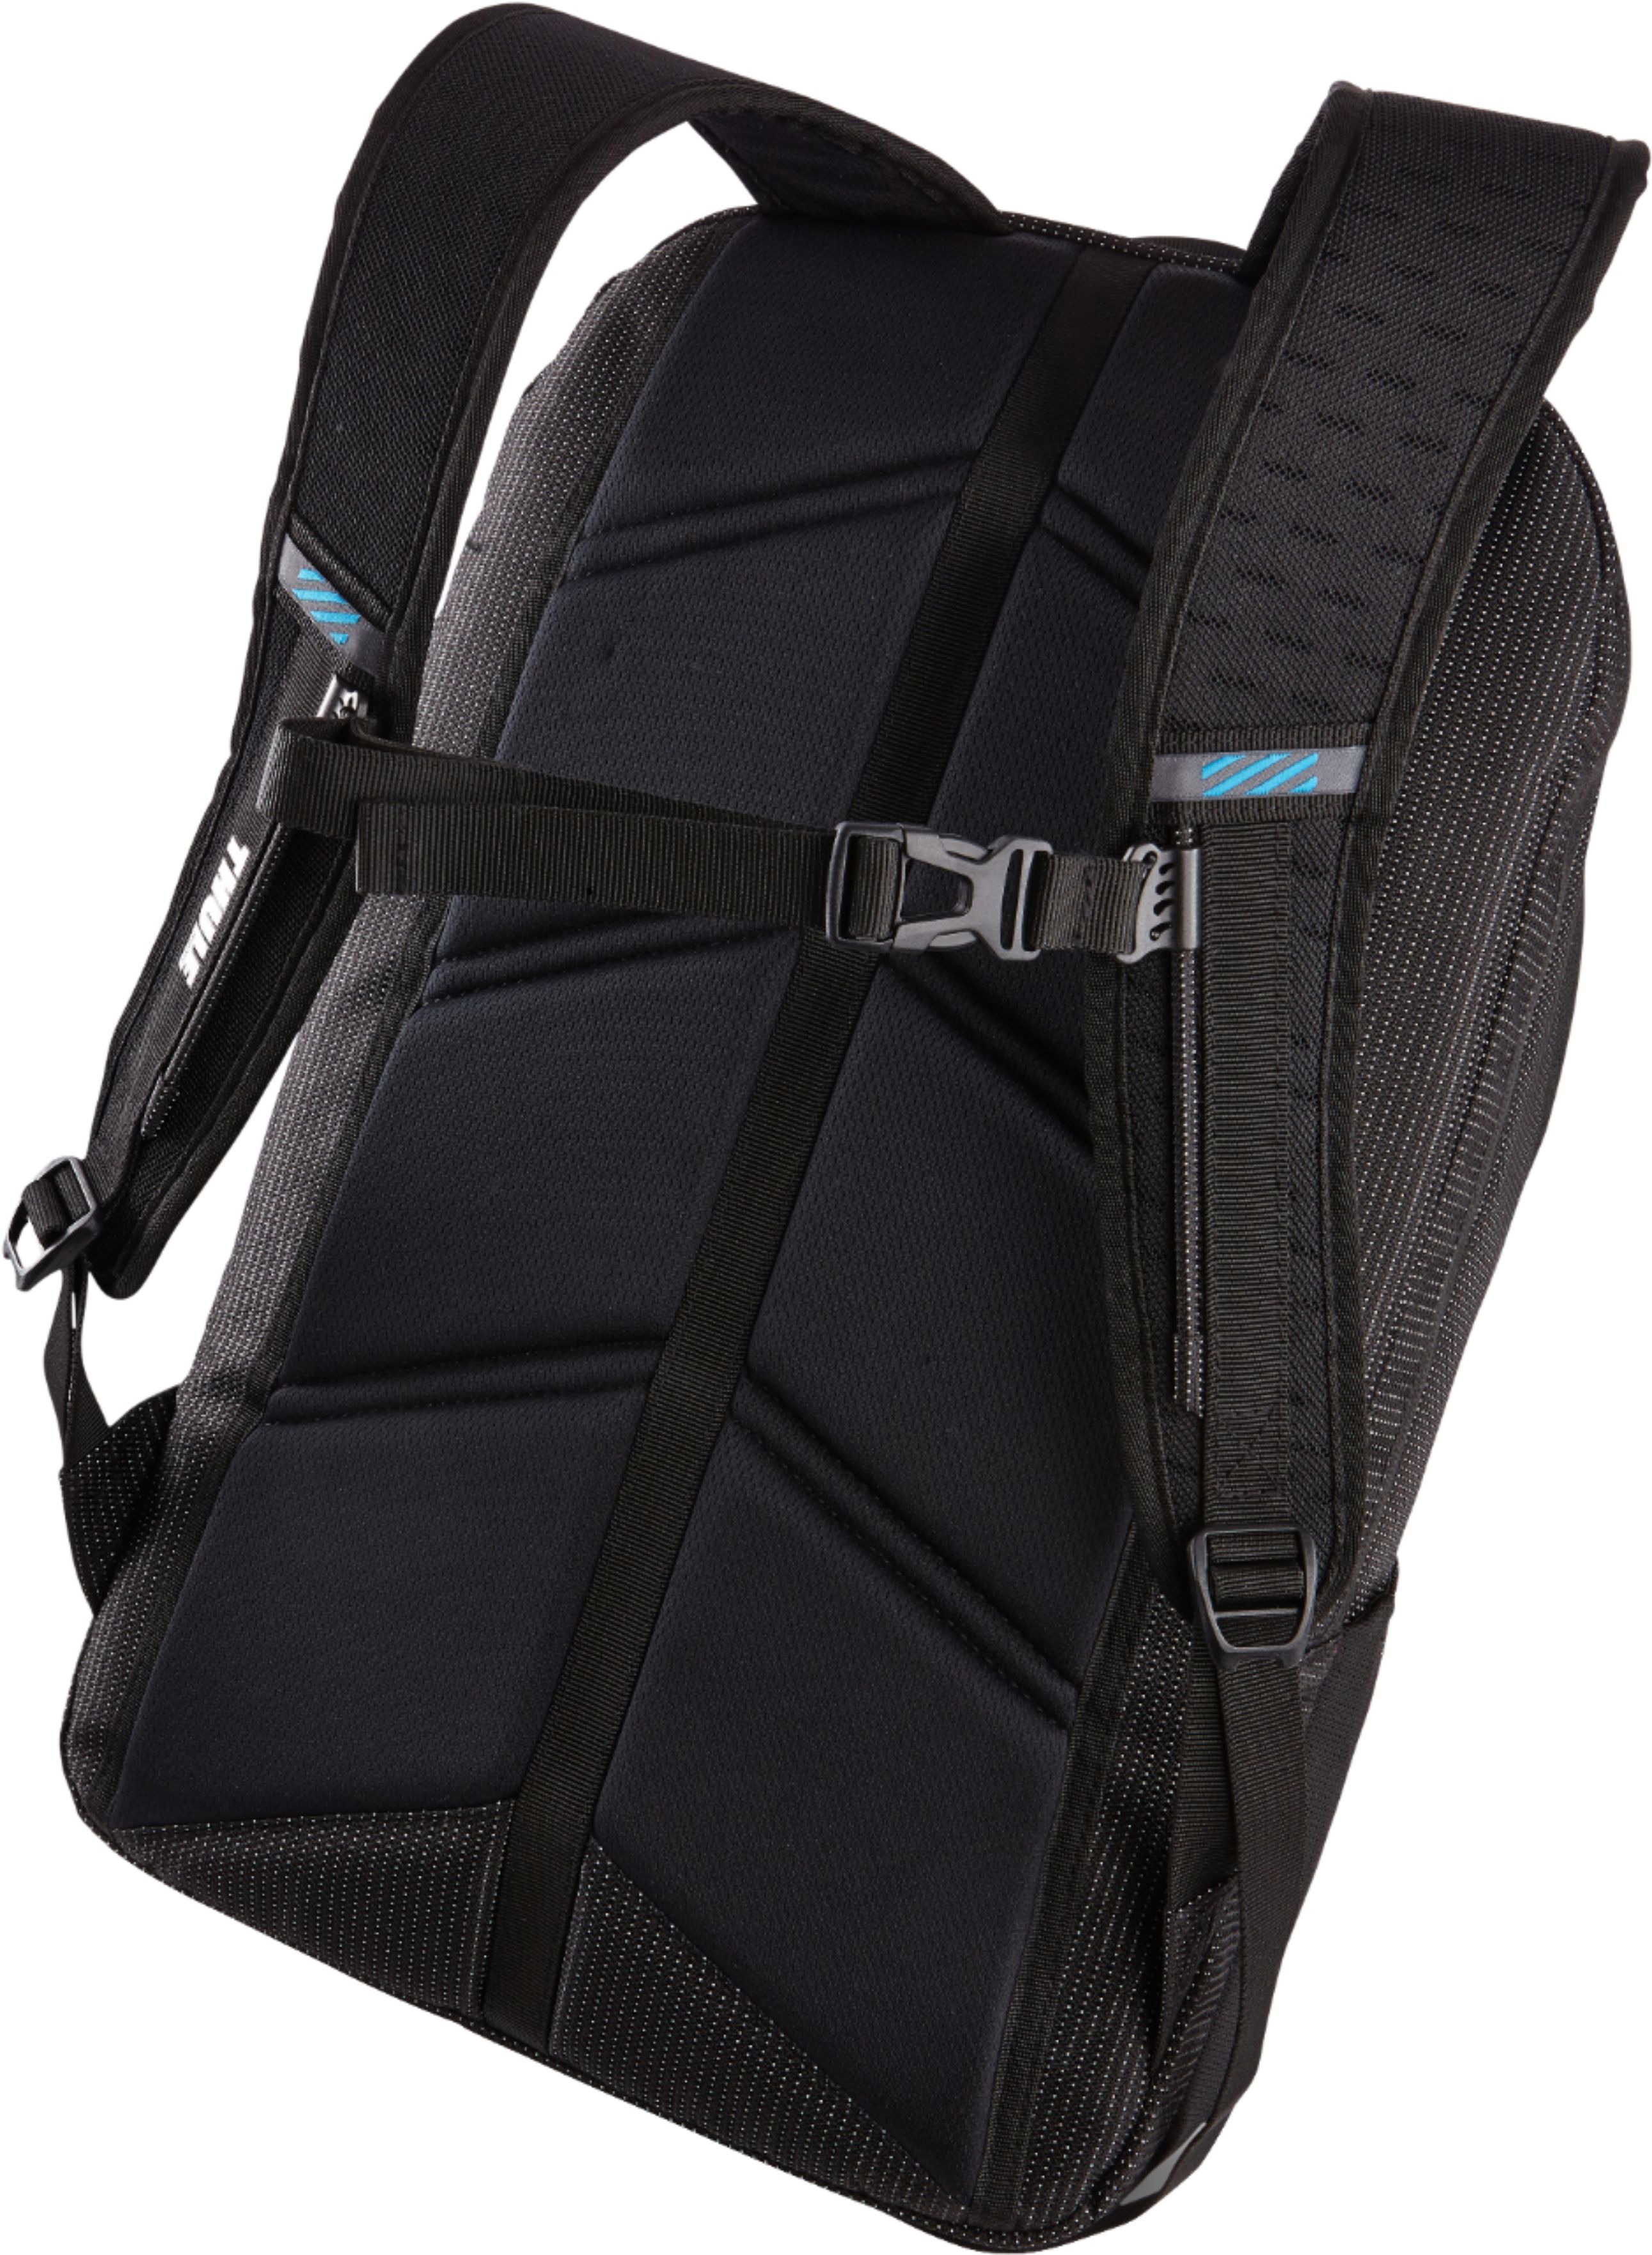 Thule Crossover 32L Weatherproof Backpack for with 10.1" Tablet Sleeve, Crushproof SafeZone, & Water Bottle Holder Black 3201383 -